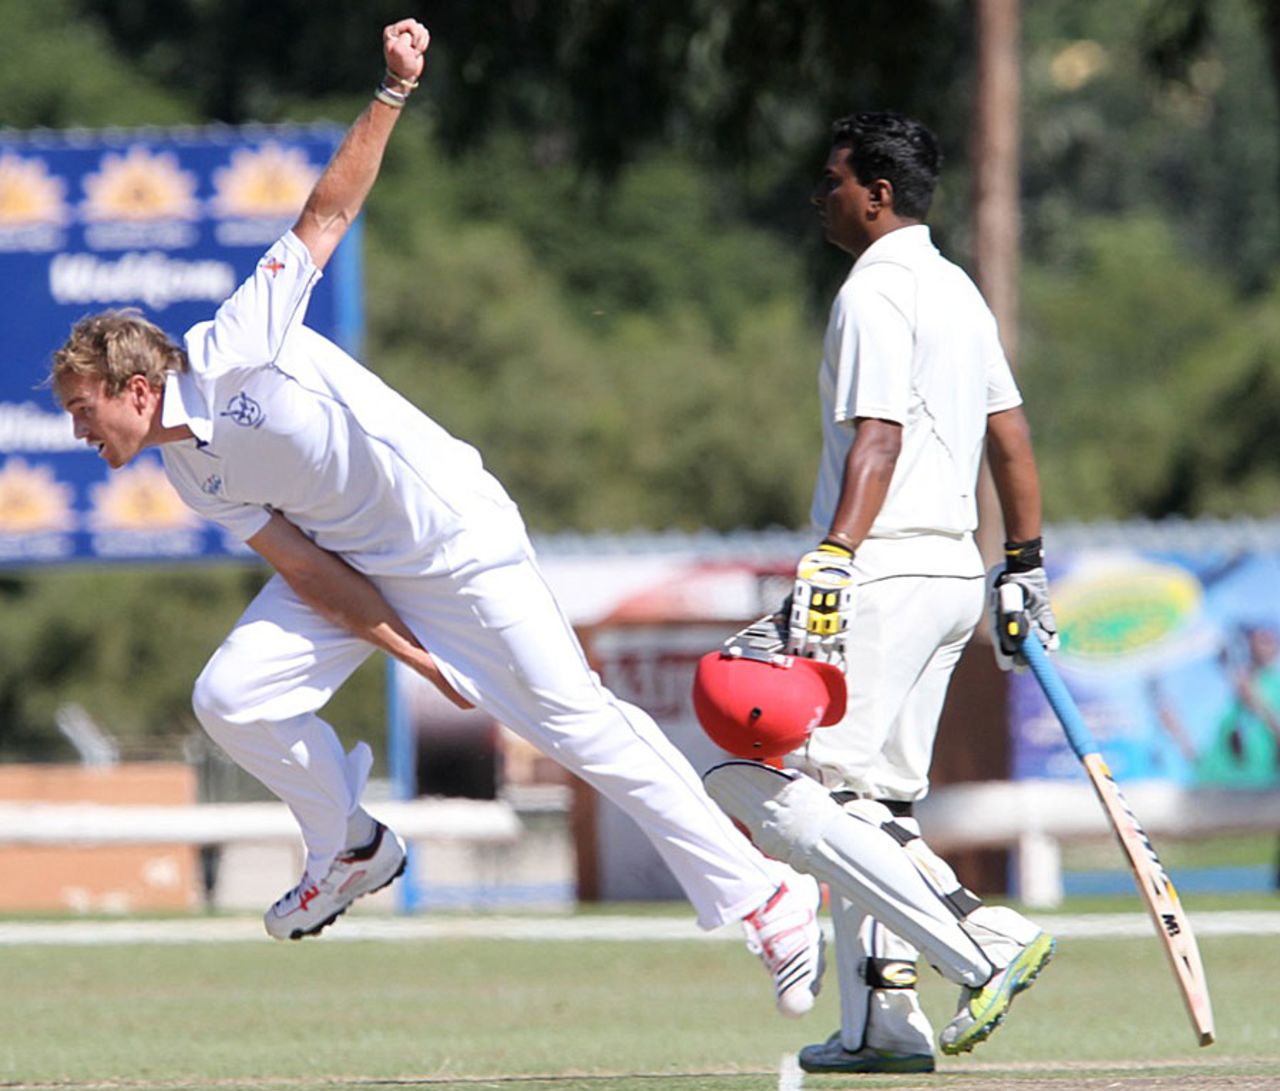 Christi Viljoen took 7 for 61 for Namibia, Namibia v Canada, ICC Intercontinental Cup, Windhoek, 4th day, April 8, 2012